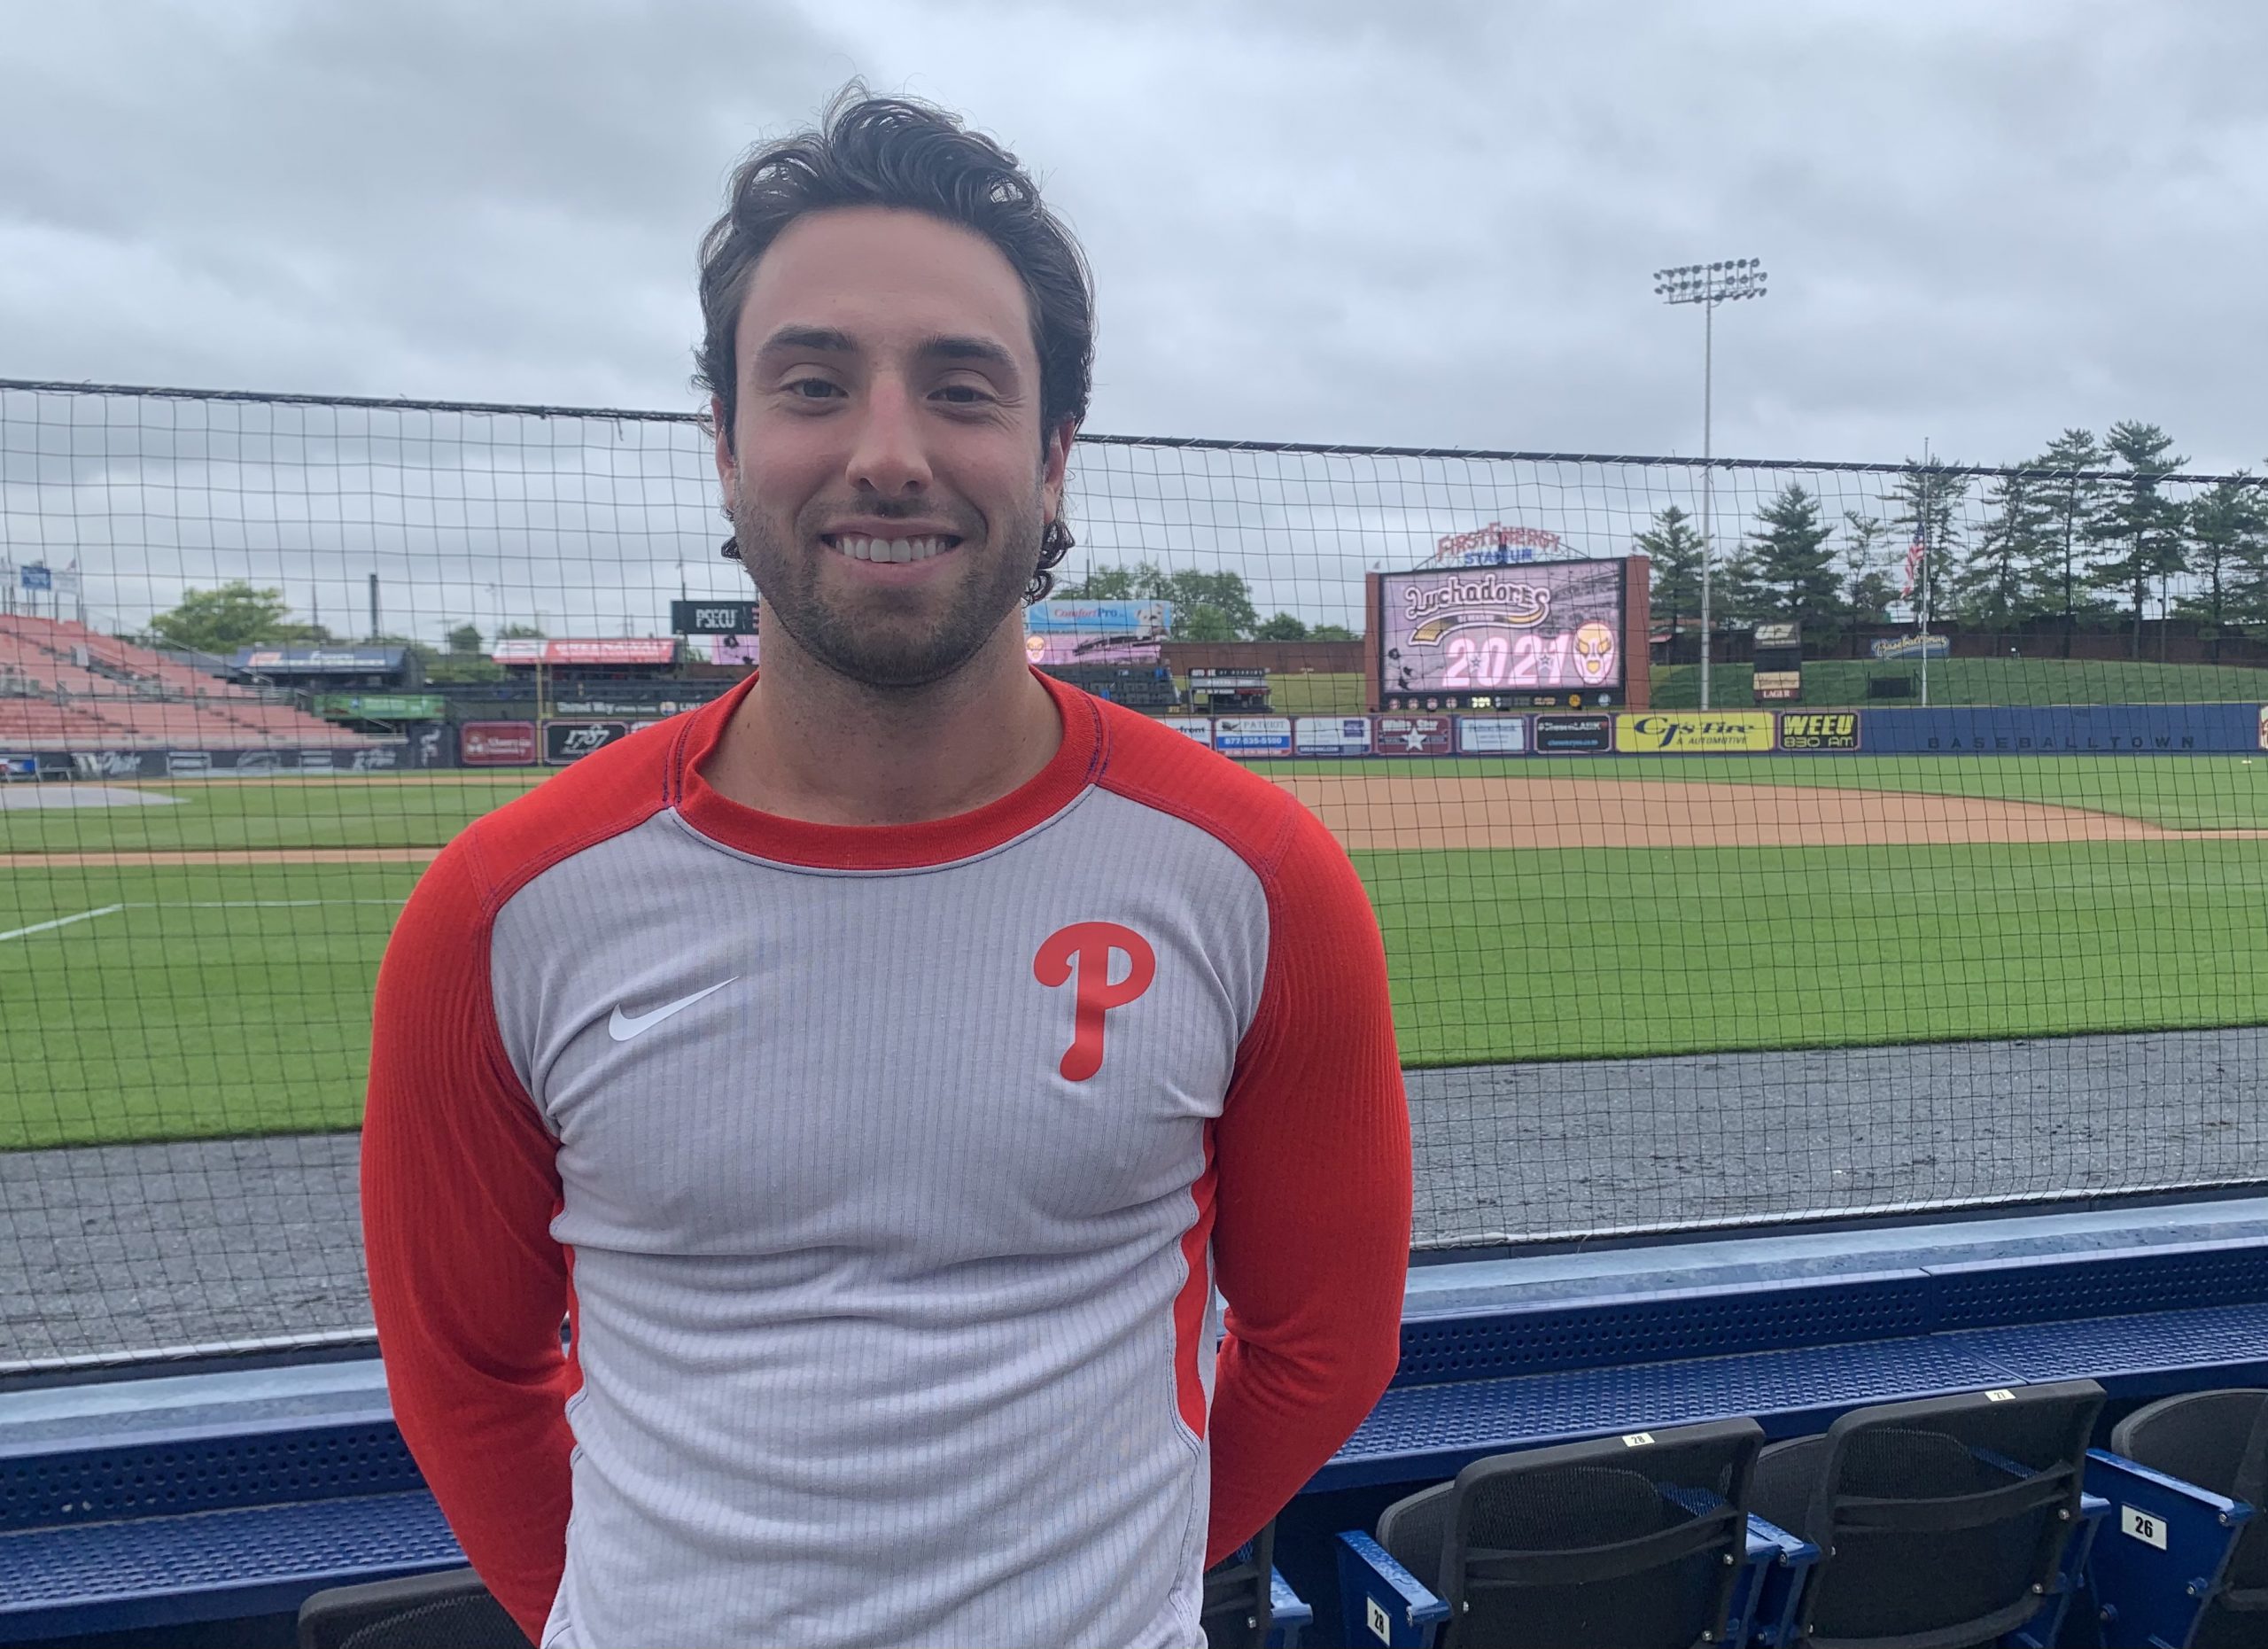 Phillies outfield prospect Matt Vierling battles injury amid red-hot start   Phillies Nation - Your source for Philadelphia Phillies news, opinion,  history, rumors, events, and other fun stuff.